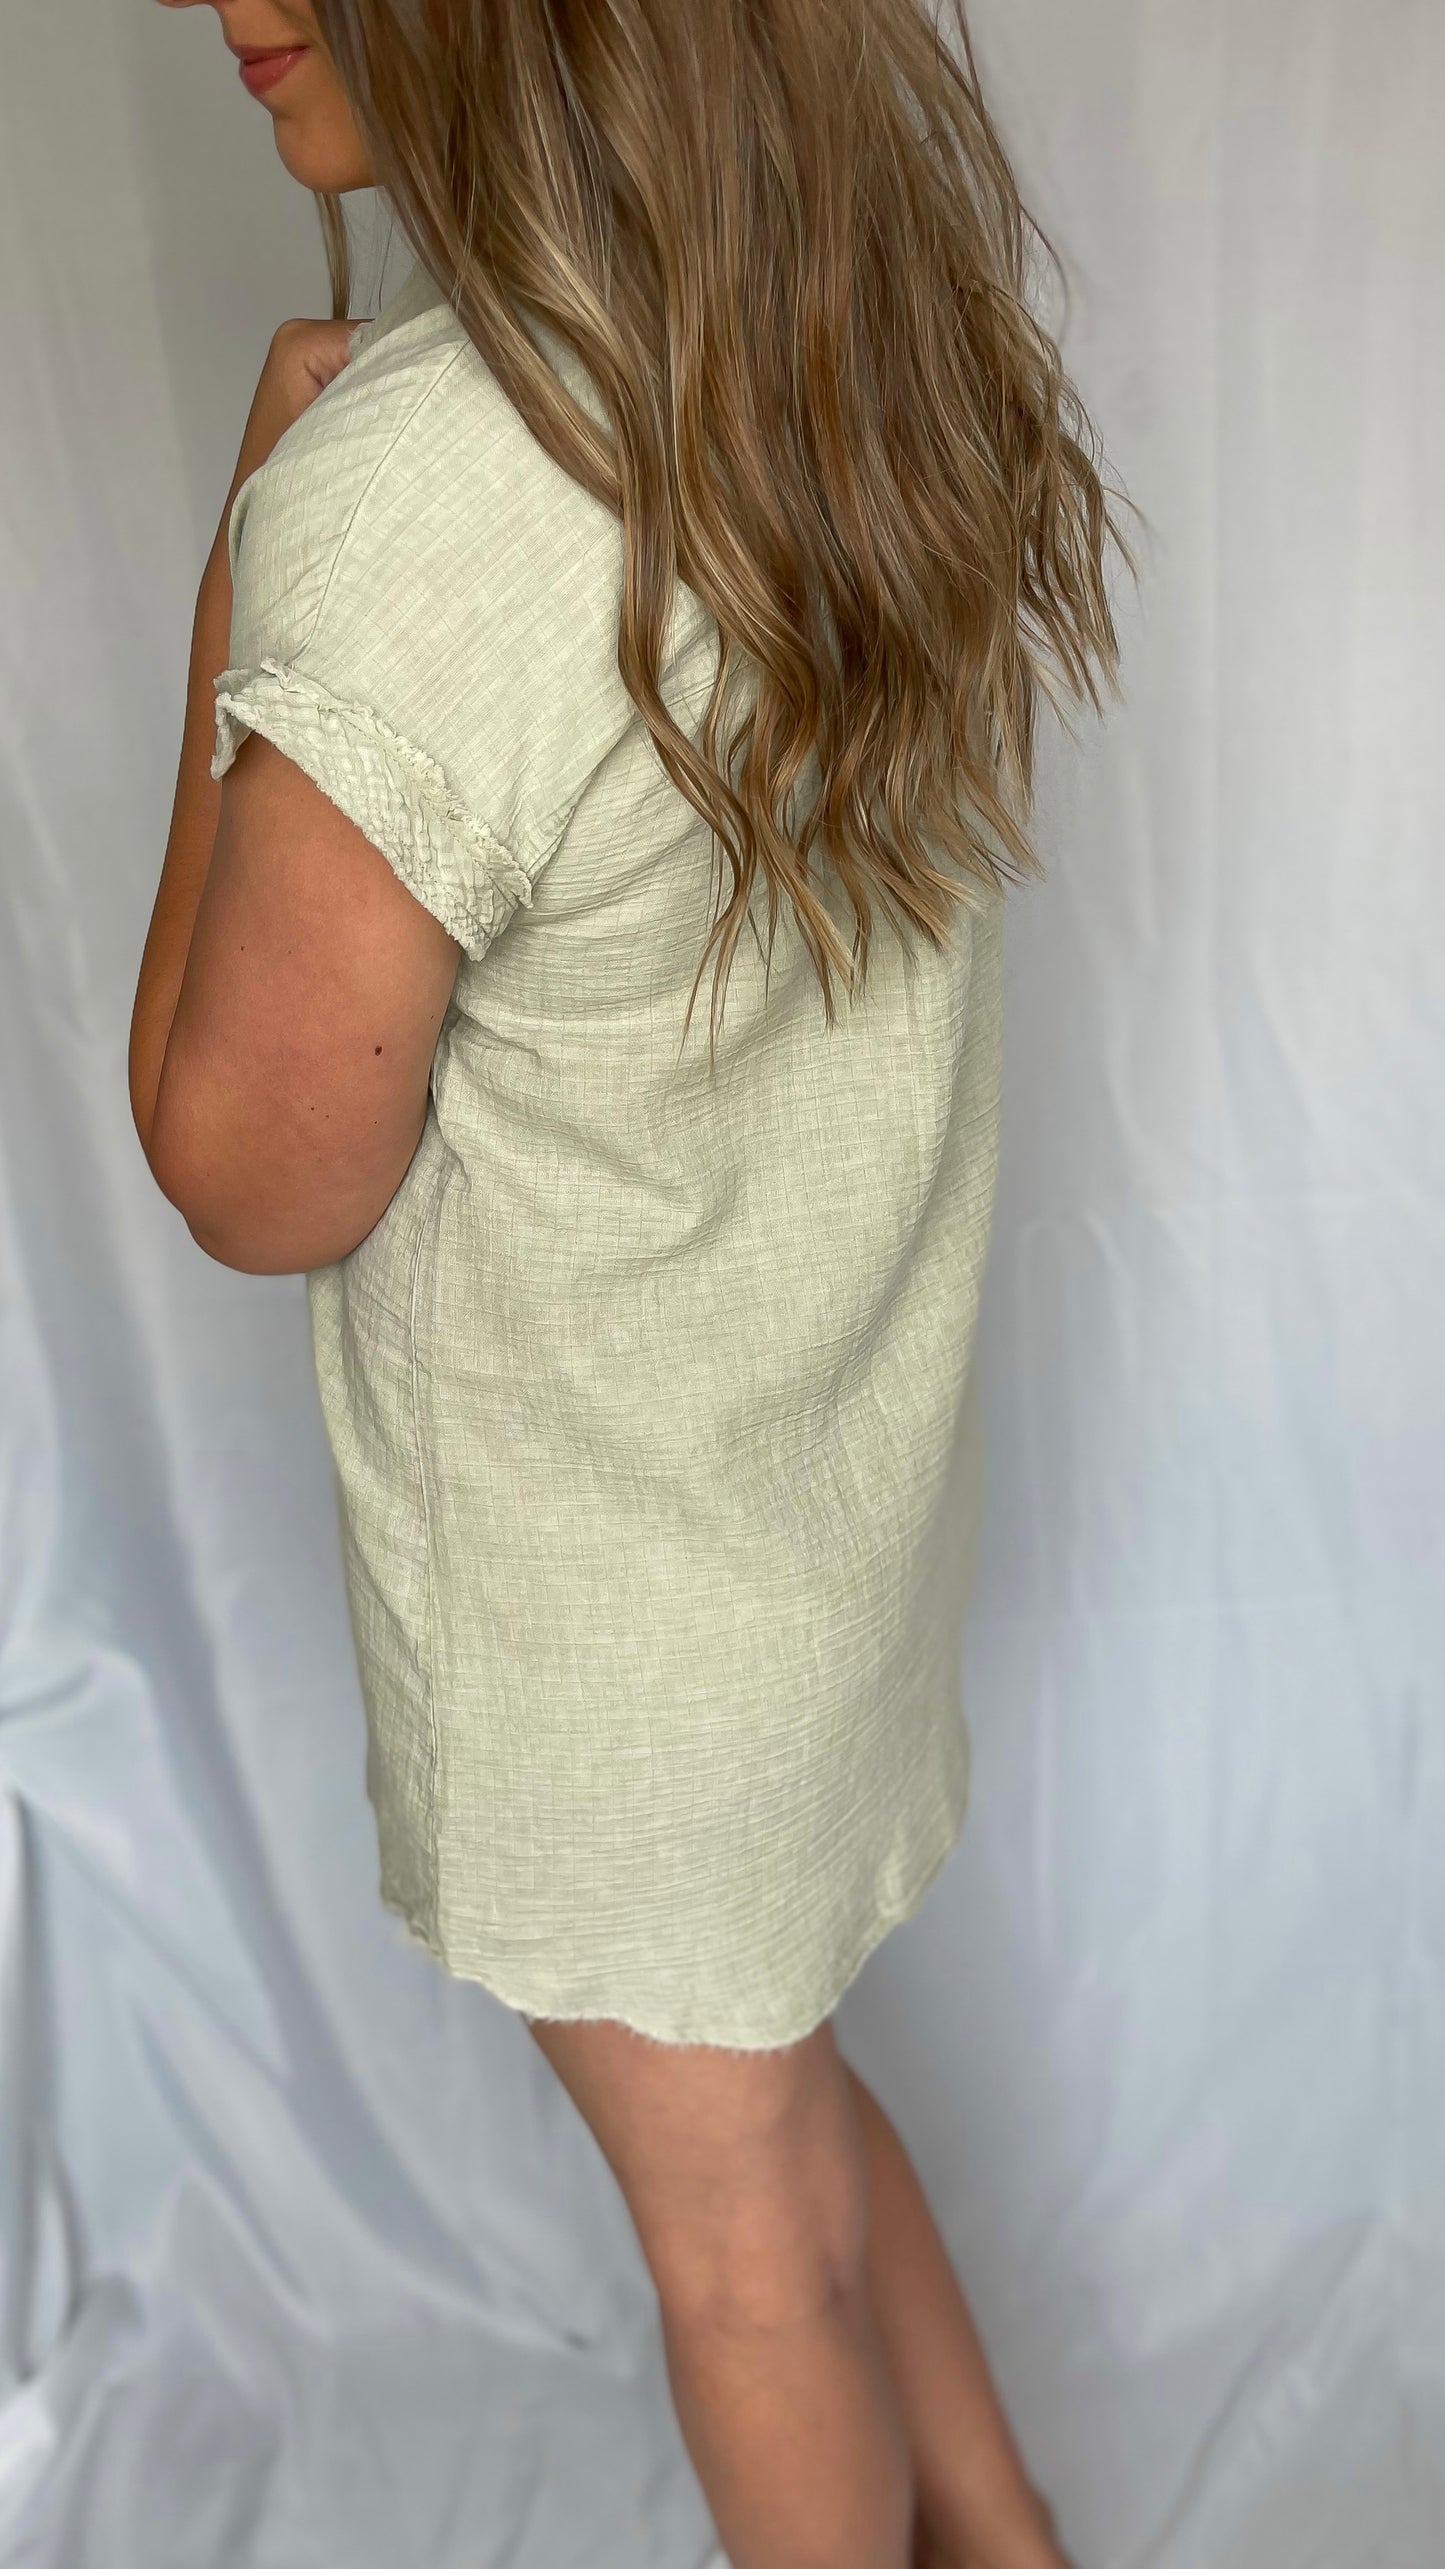 Let's Run Away Olive Button Down Dress